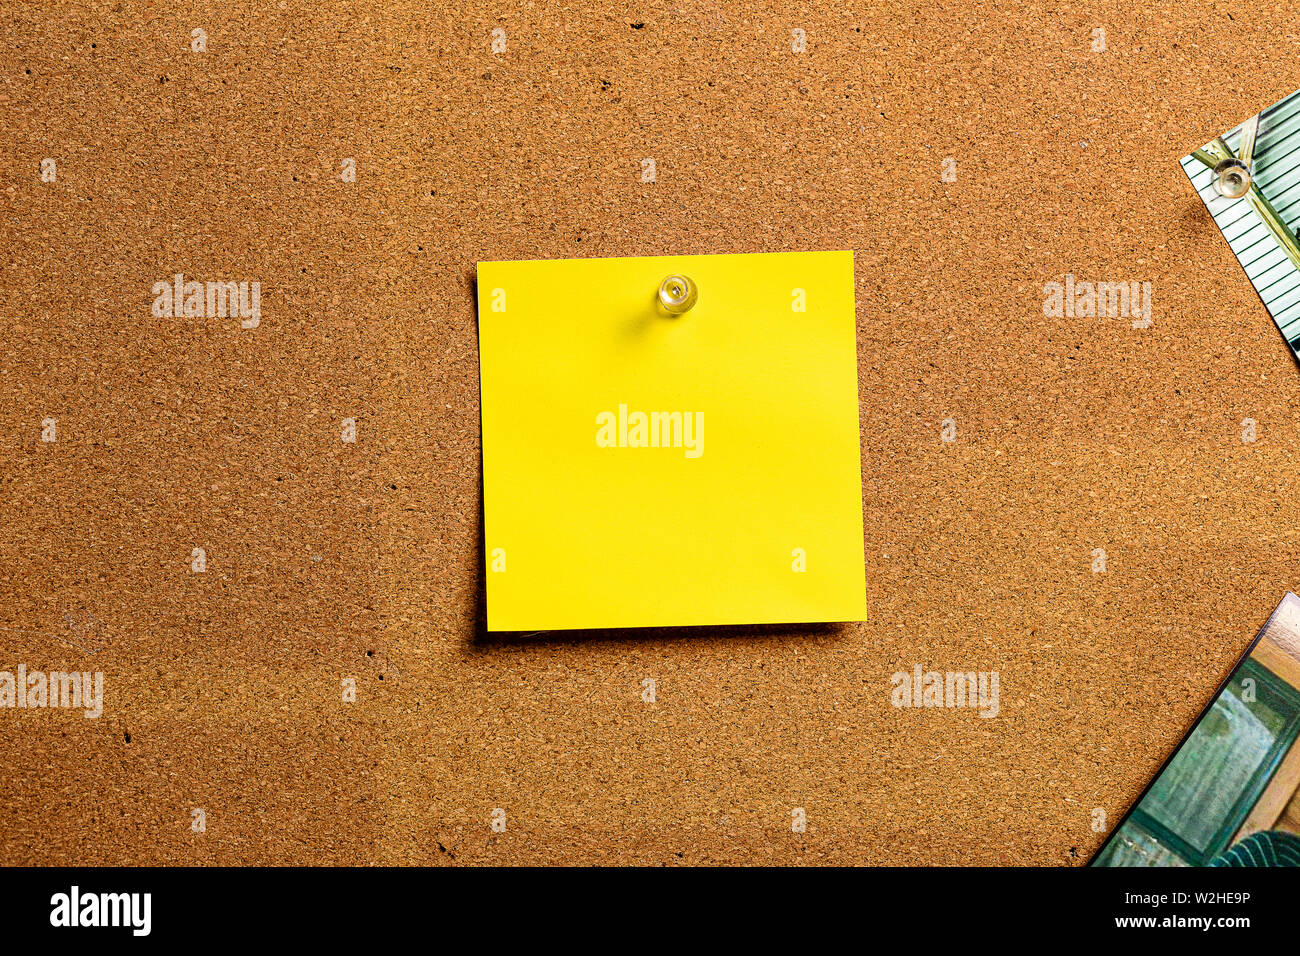 Corkboard/Bulletin Board with a single yellow Sticky Note centered on the board.  The note is perfect for accentuating a point while using the open co Stock Photo